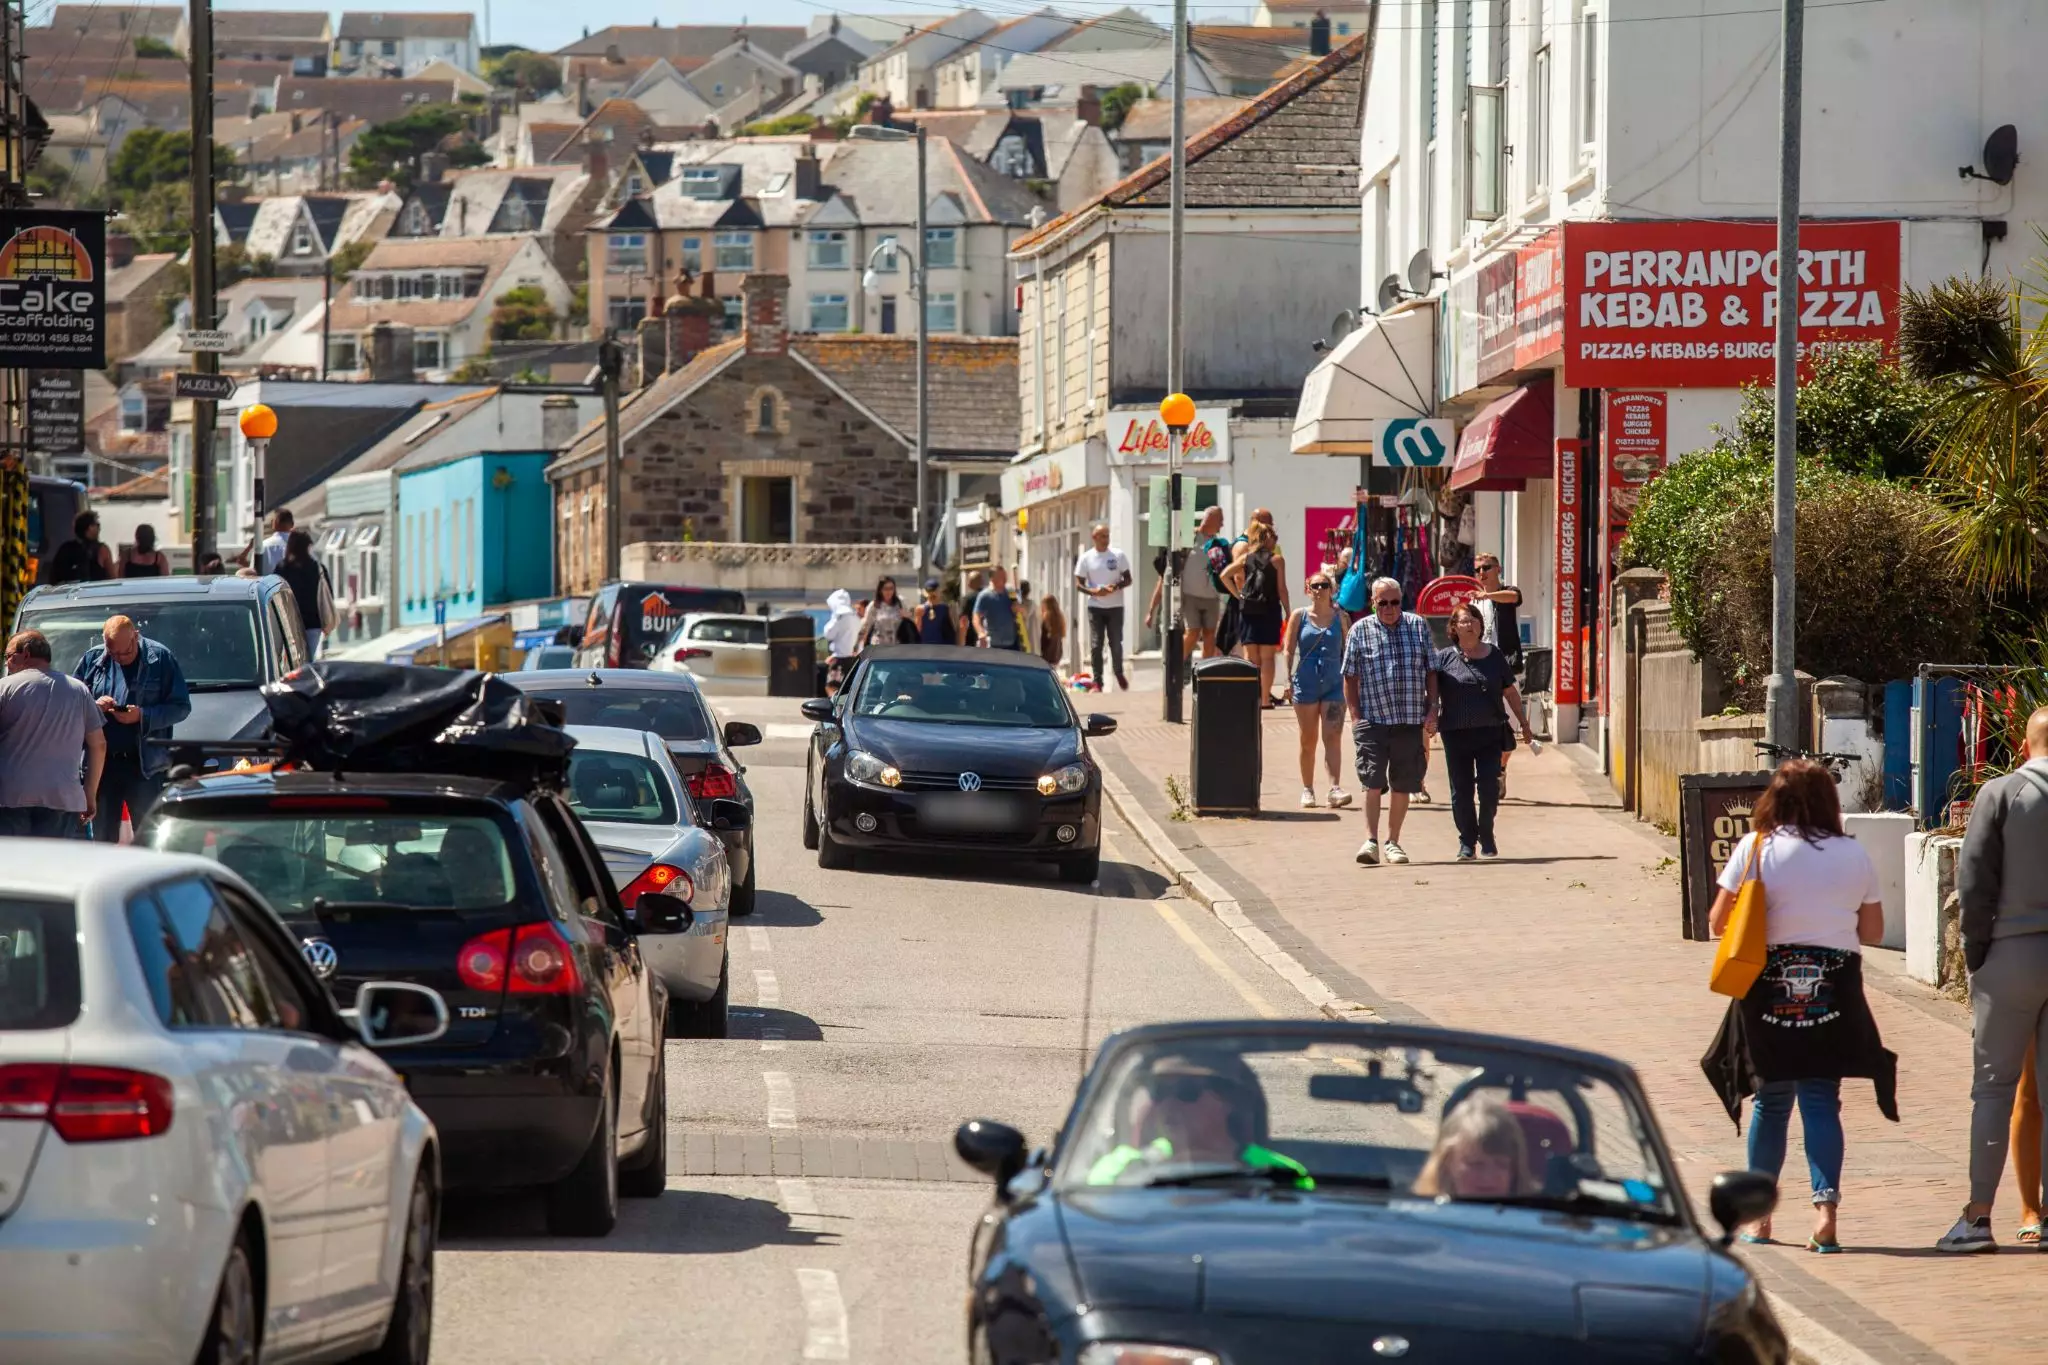 One resident likened Cornwall to 'Benidorm on steroids'.